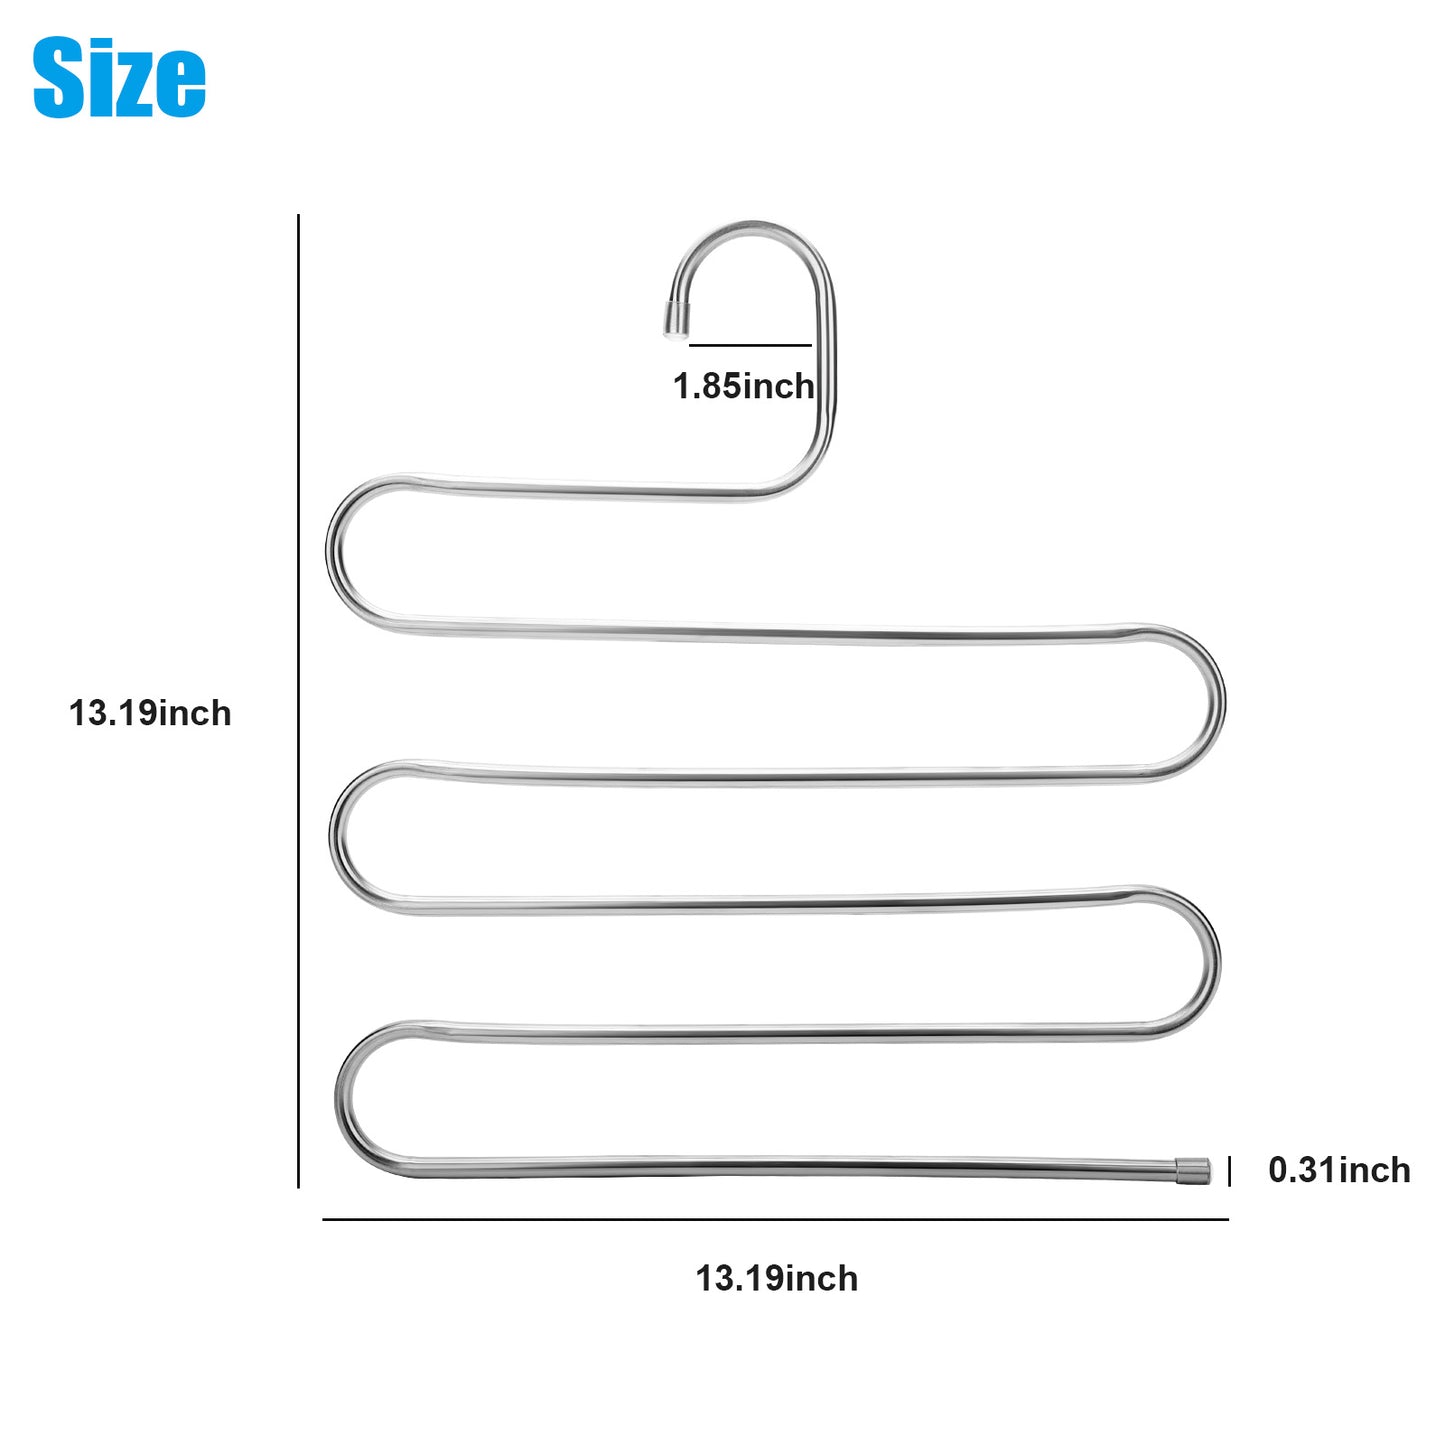 Stainless Steel S-Shaped pants hangers